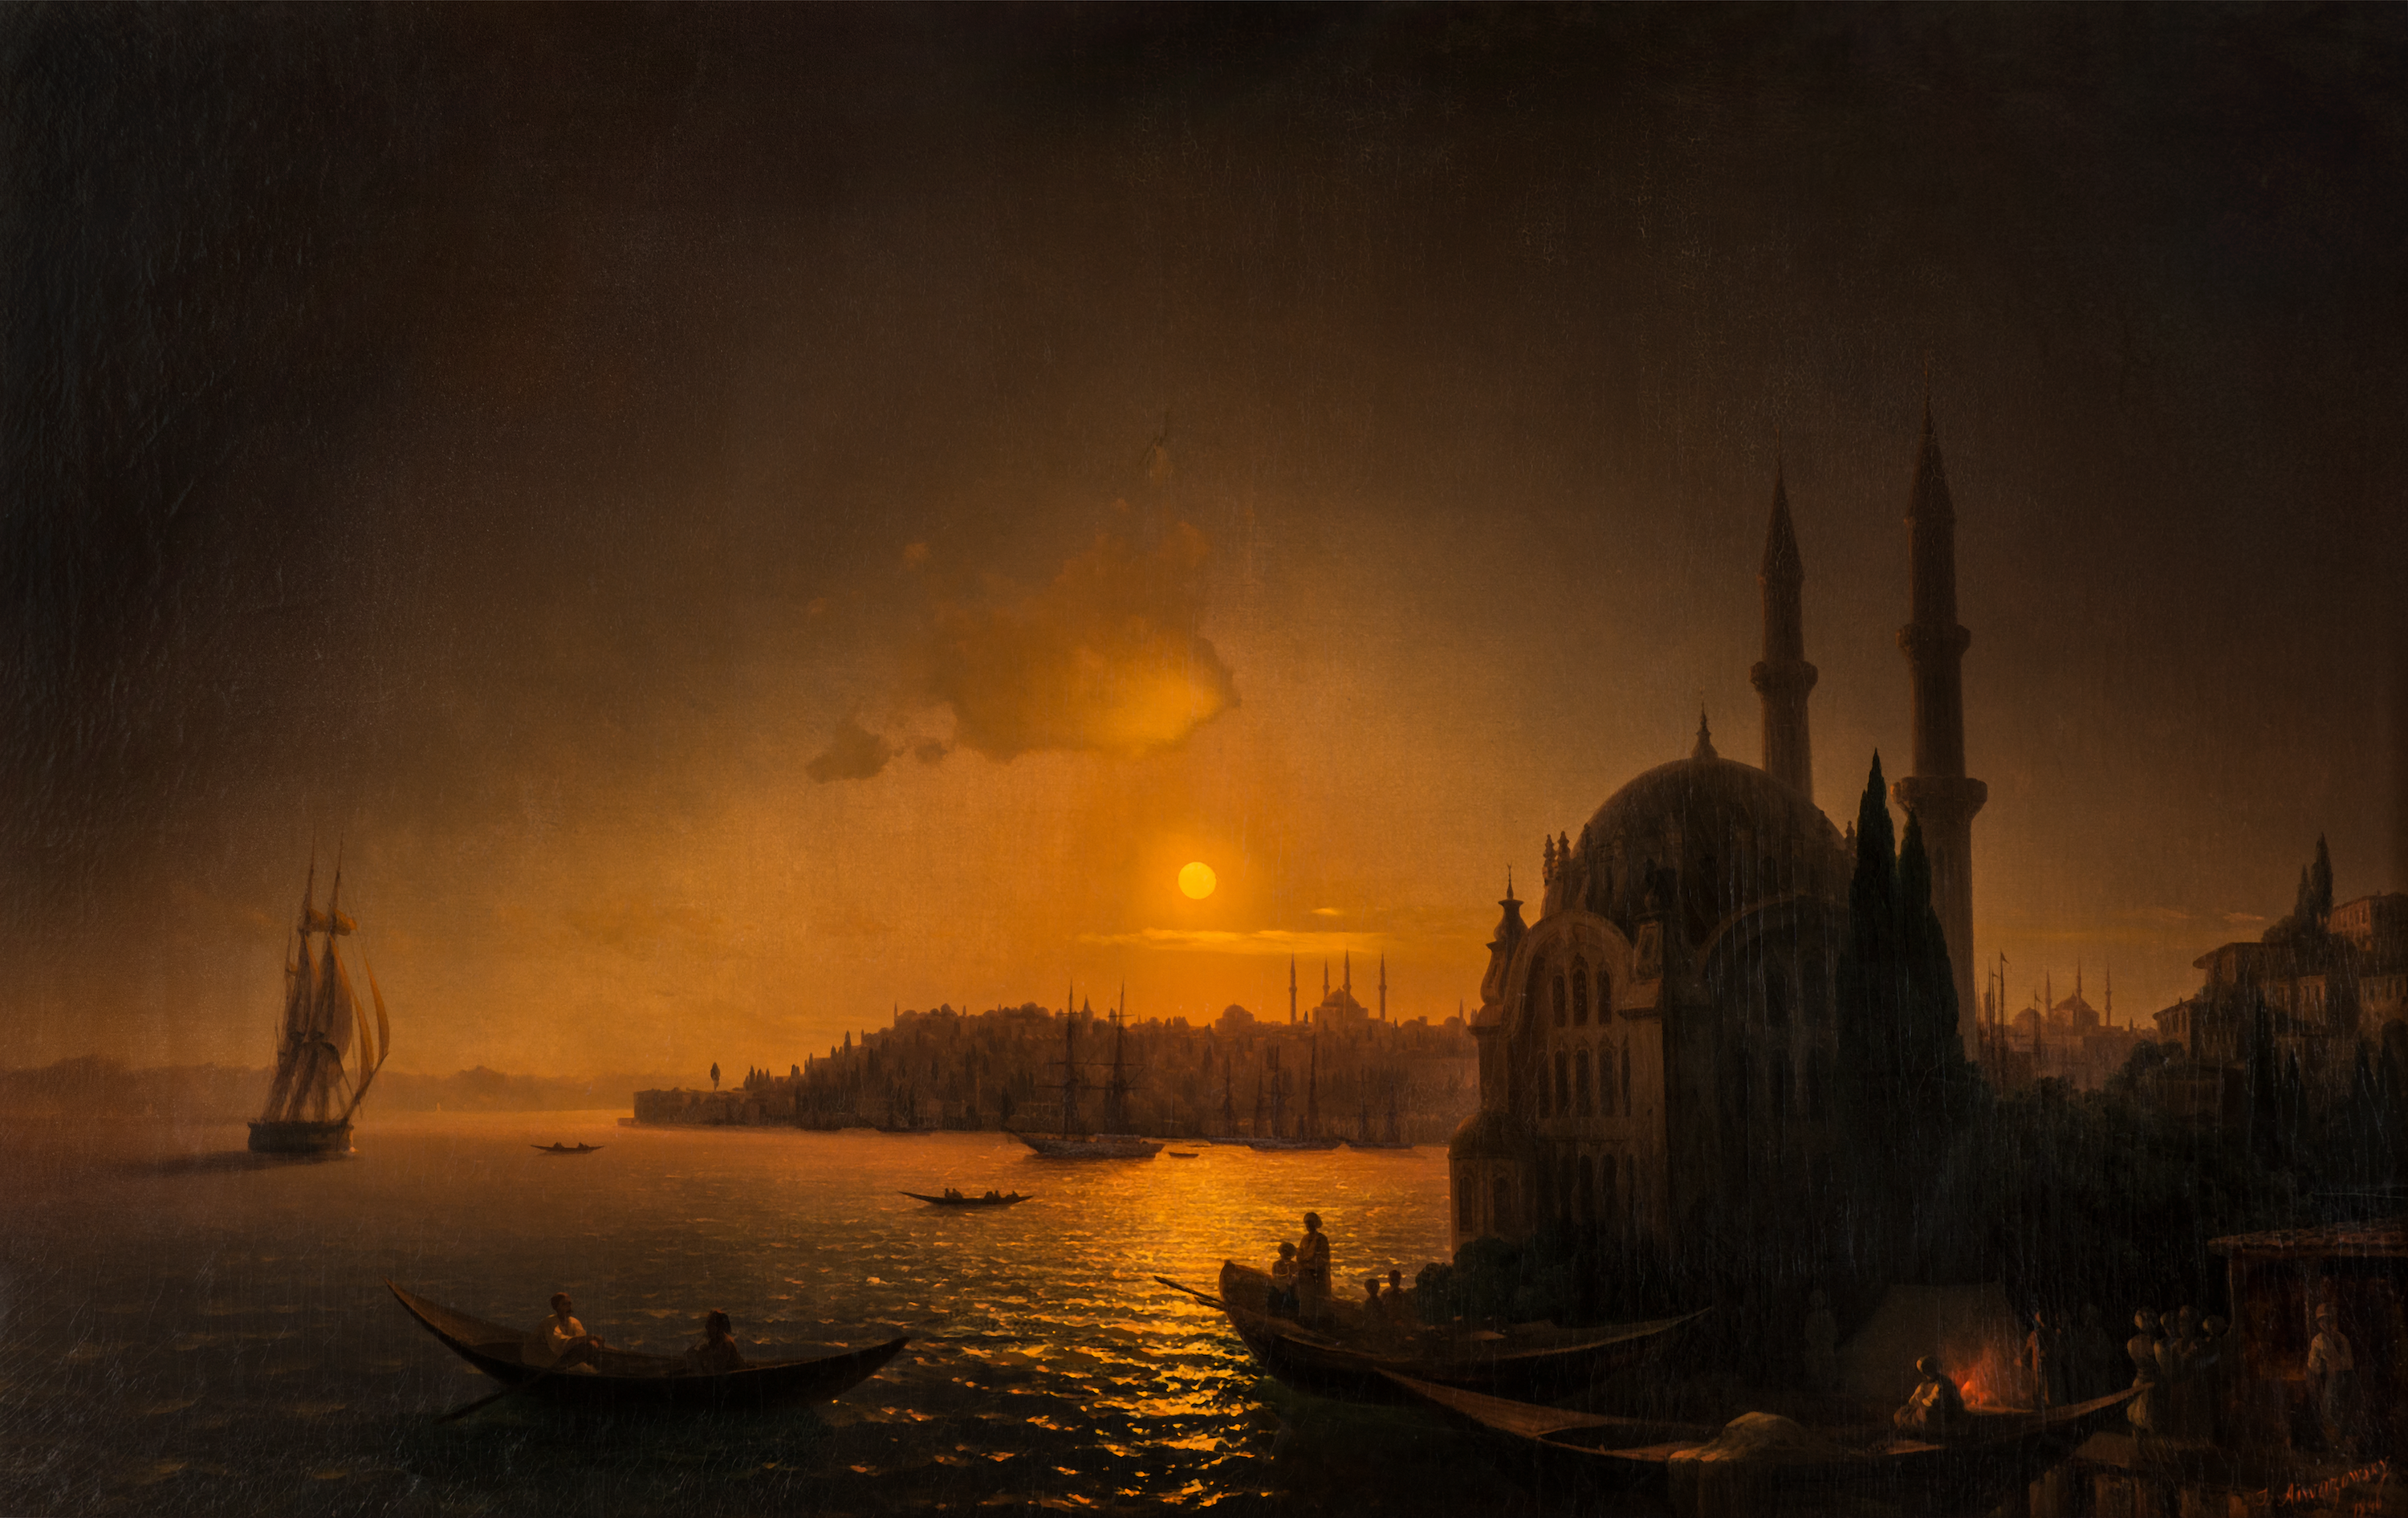 A View of Constantinople by Moonlight by Ivan Aivazovsky - 1846 - 124 x 192,5 cm State Russian Museum